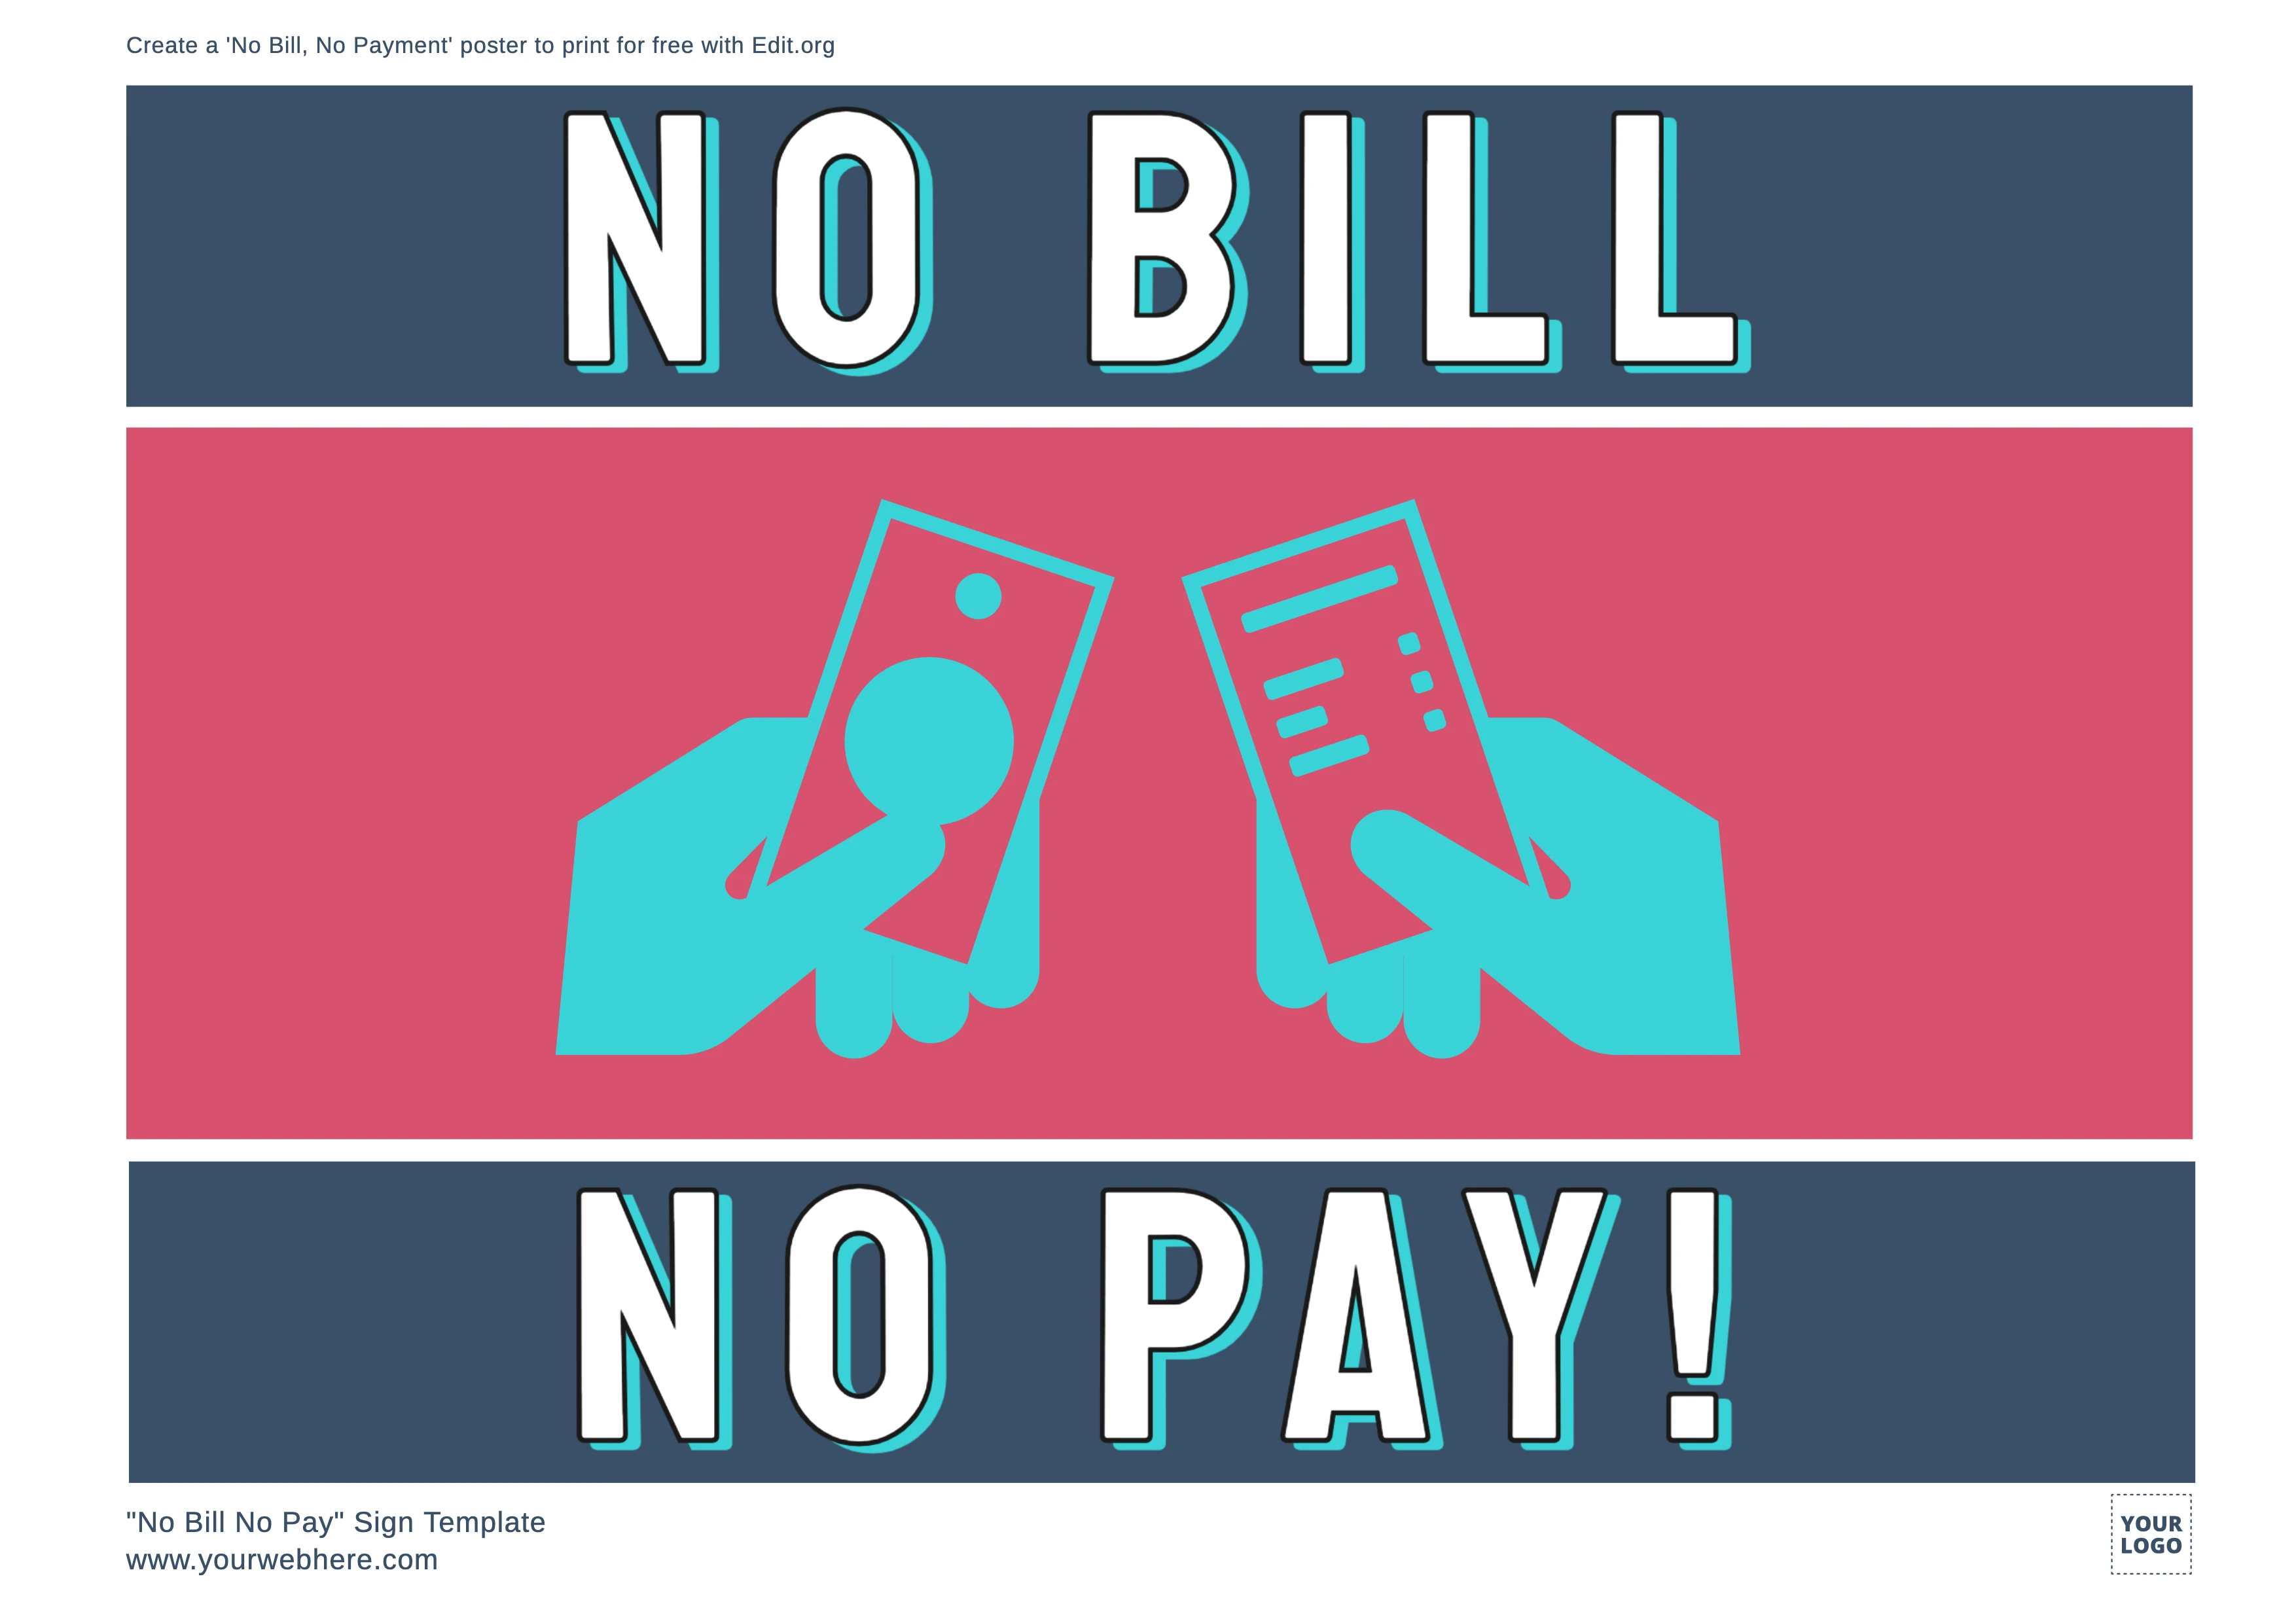 Free editable No Bill No Payment poster to download